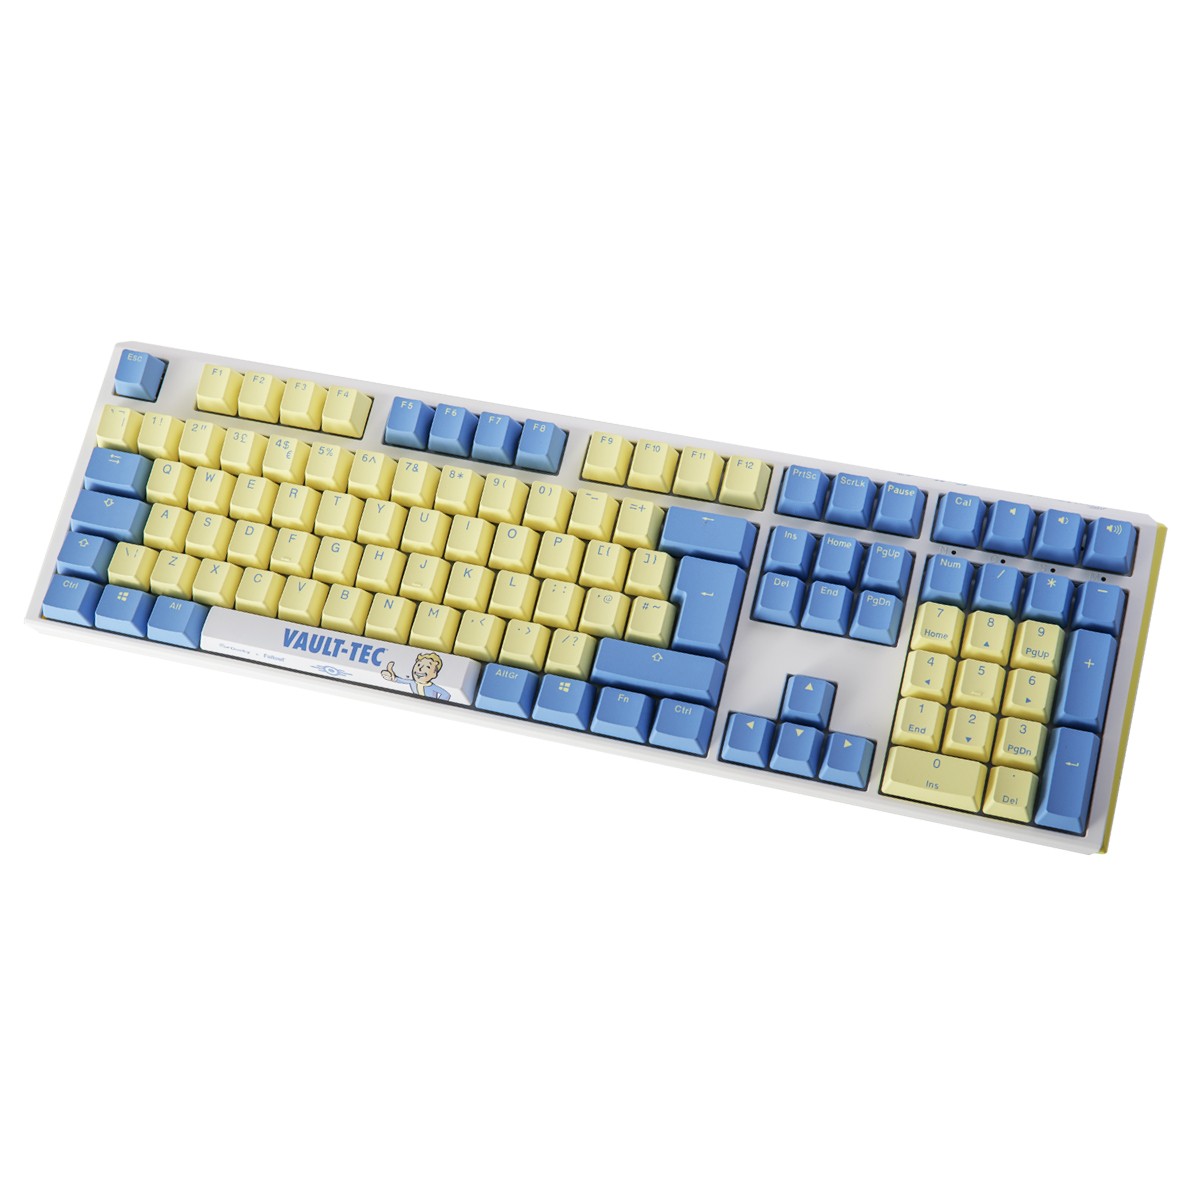 Ducky x Fallout One 3 RGB LE Cherry Blue Switch Mechanical Gaming Keyboard UK Layout